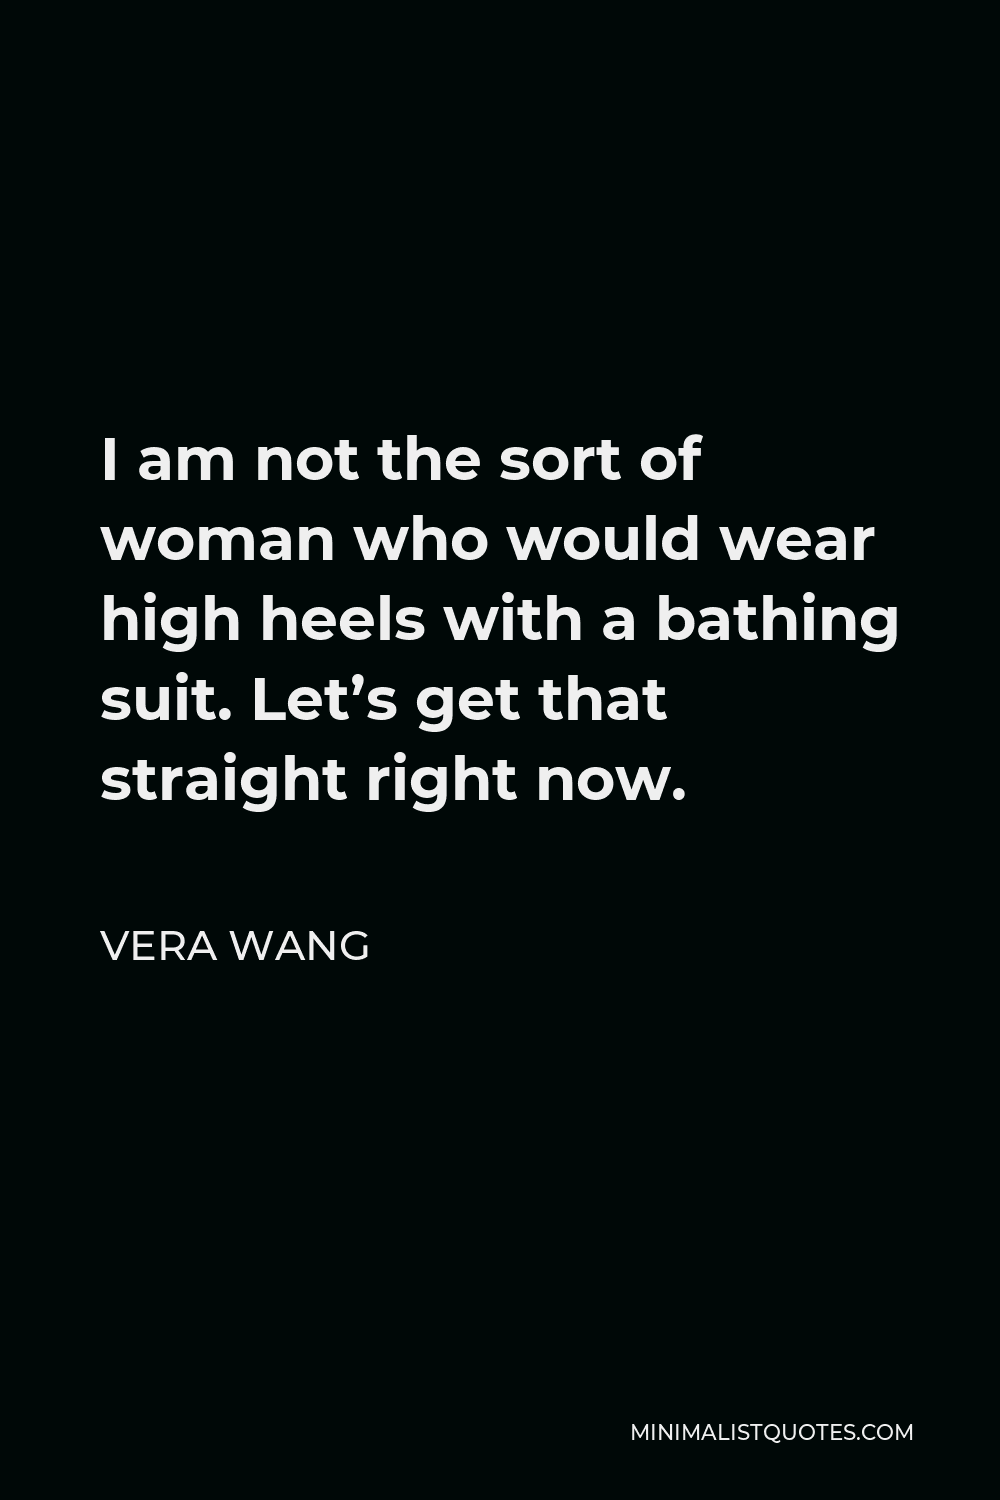 Vera Wang Quote - I am not the sort of woman who would wear high heels with a bathing suit. Let’s get that straight right now.